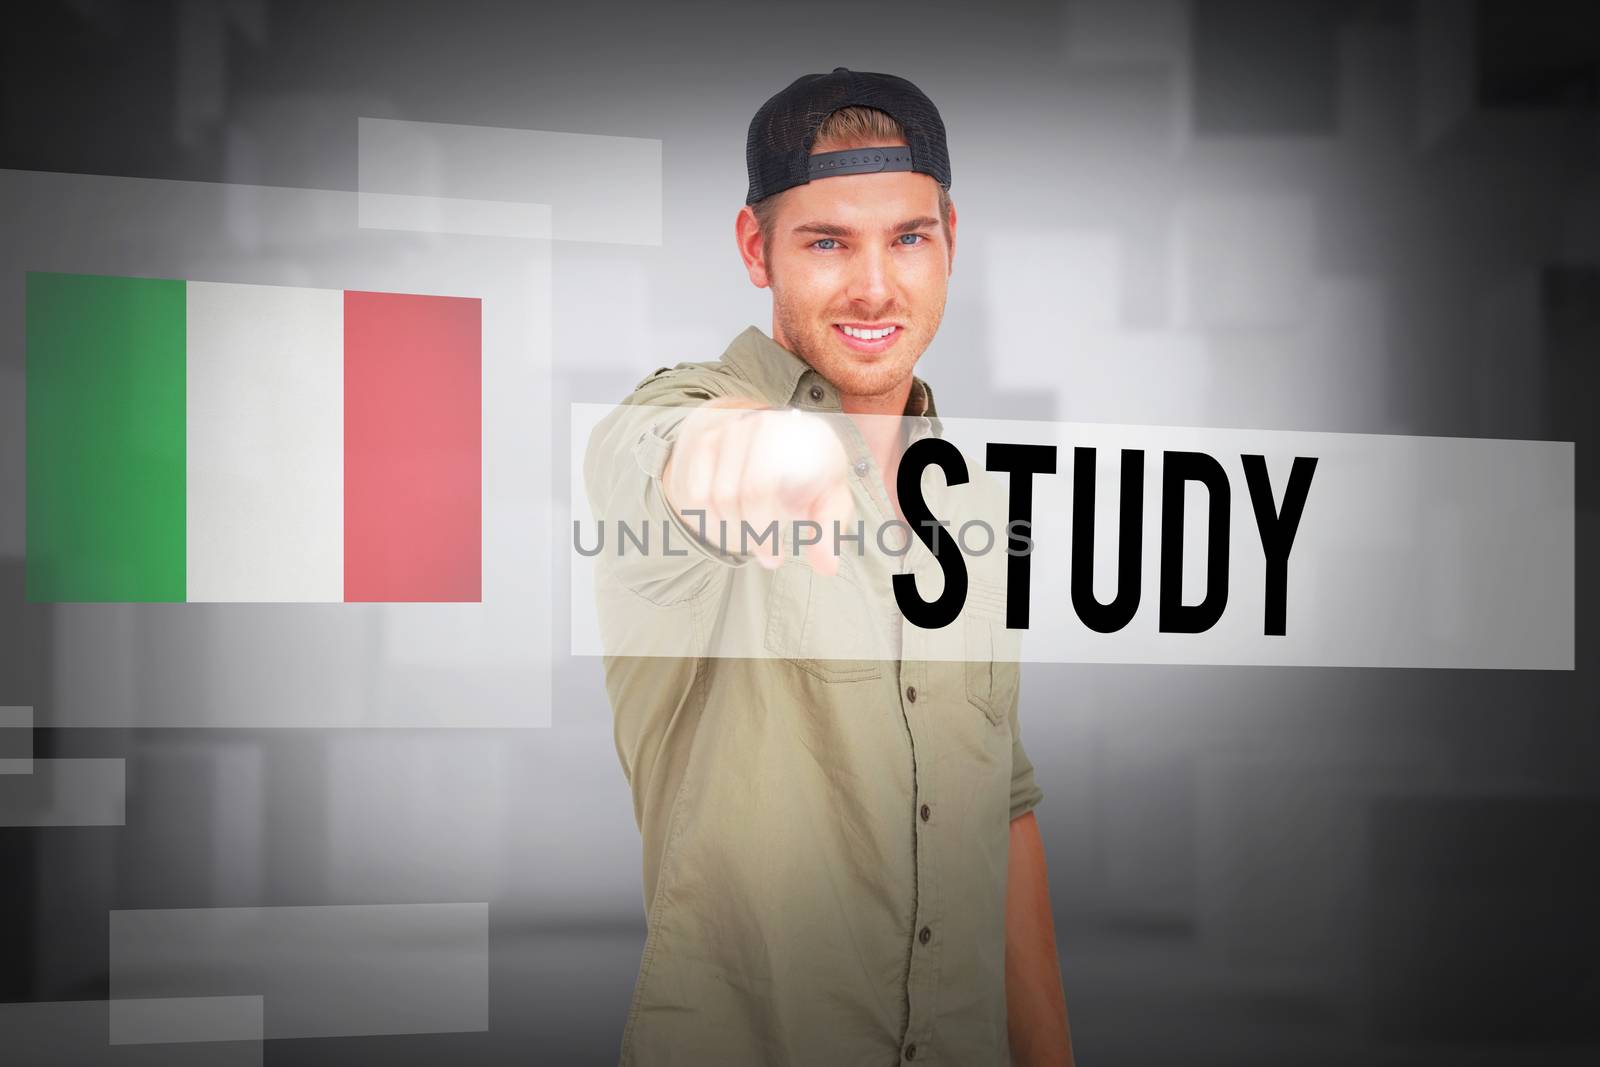 The word study and man smiling and wearing baseball hat backwards and pointing against abstract white room